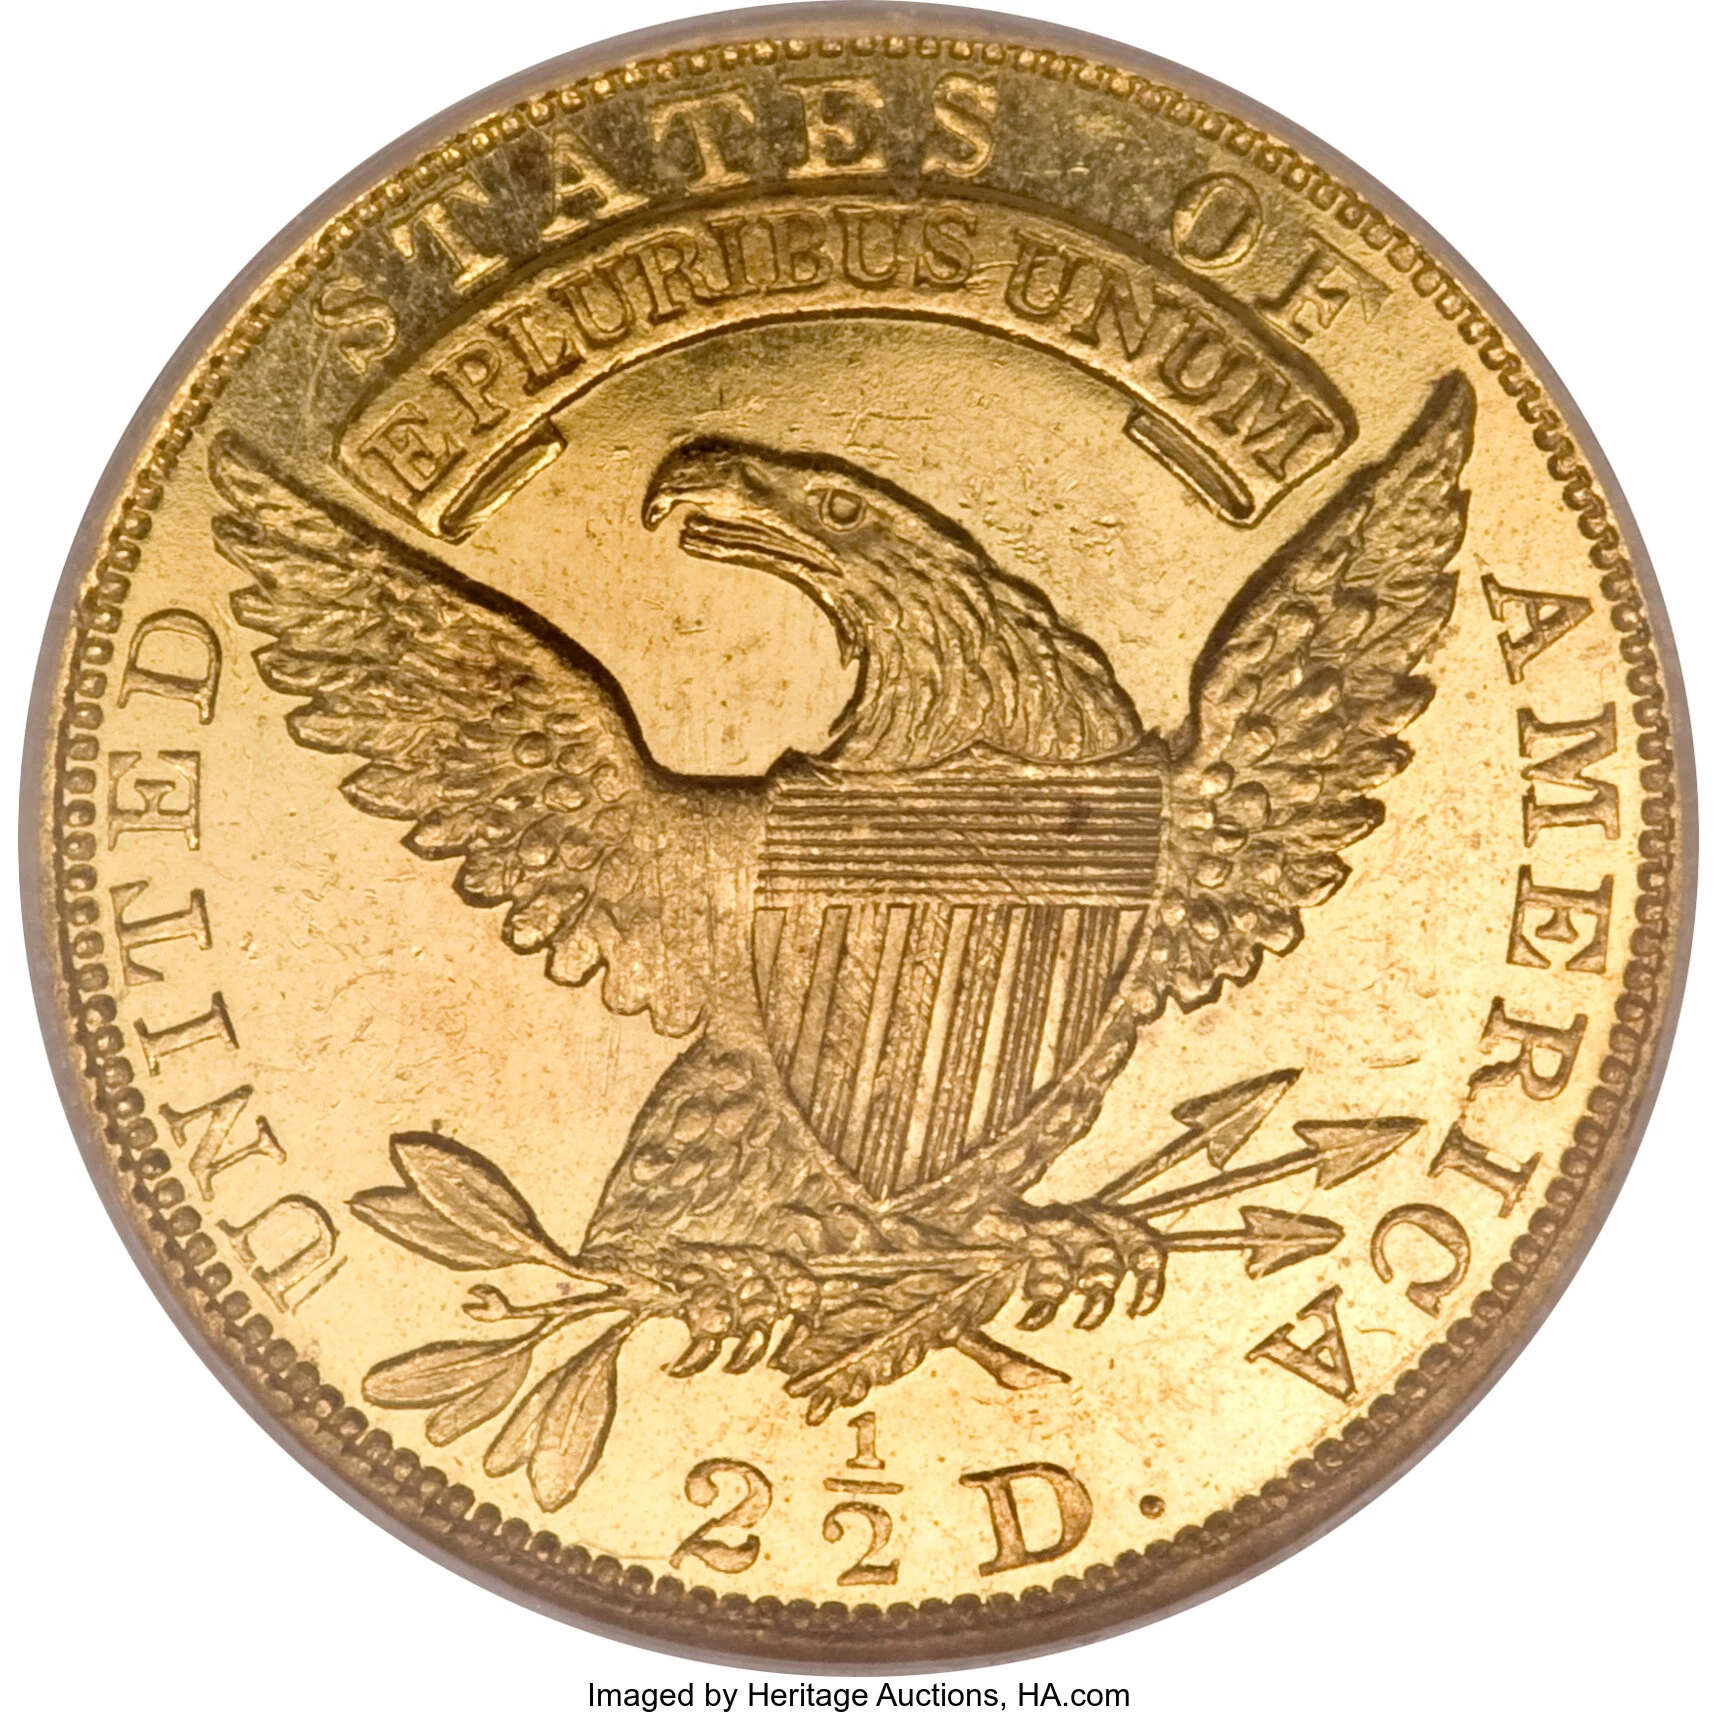 Heritage Auctions: Gold Coin Price Guide - Lookup Value of Gold